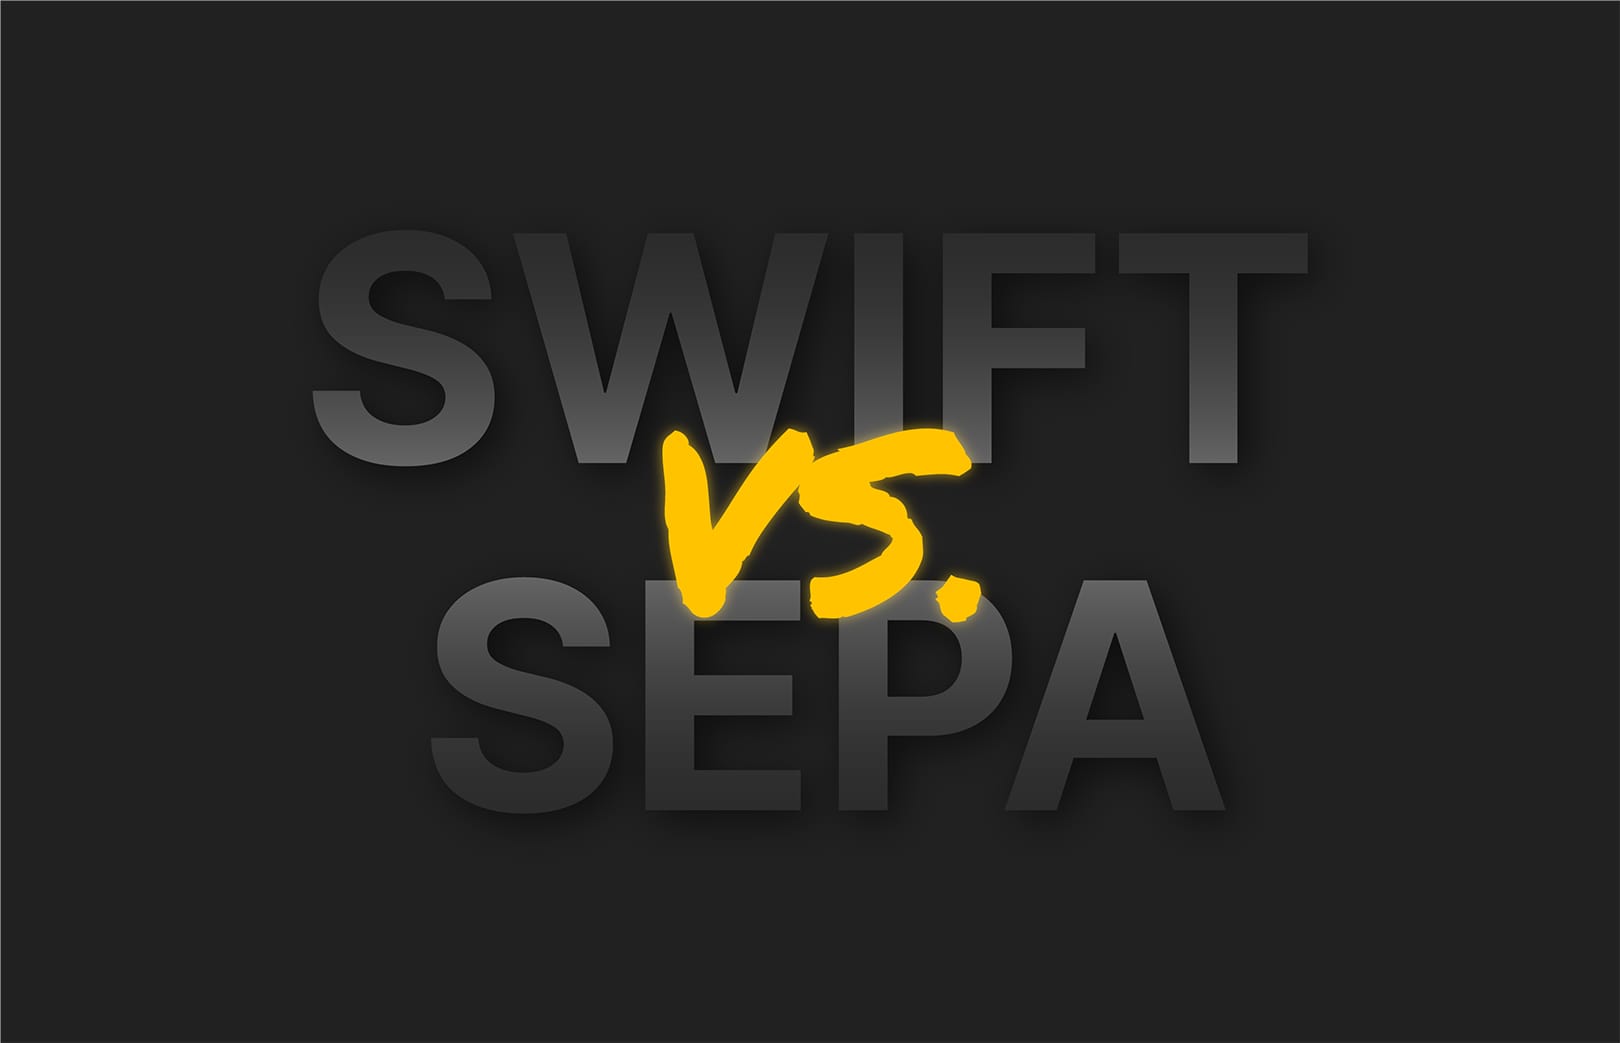 SWIFT and SEPA: What's the Difference?